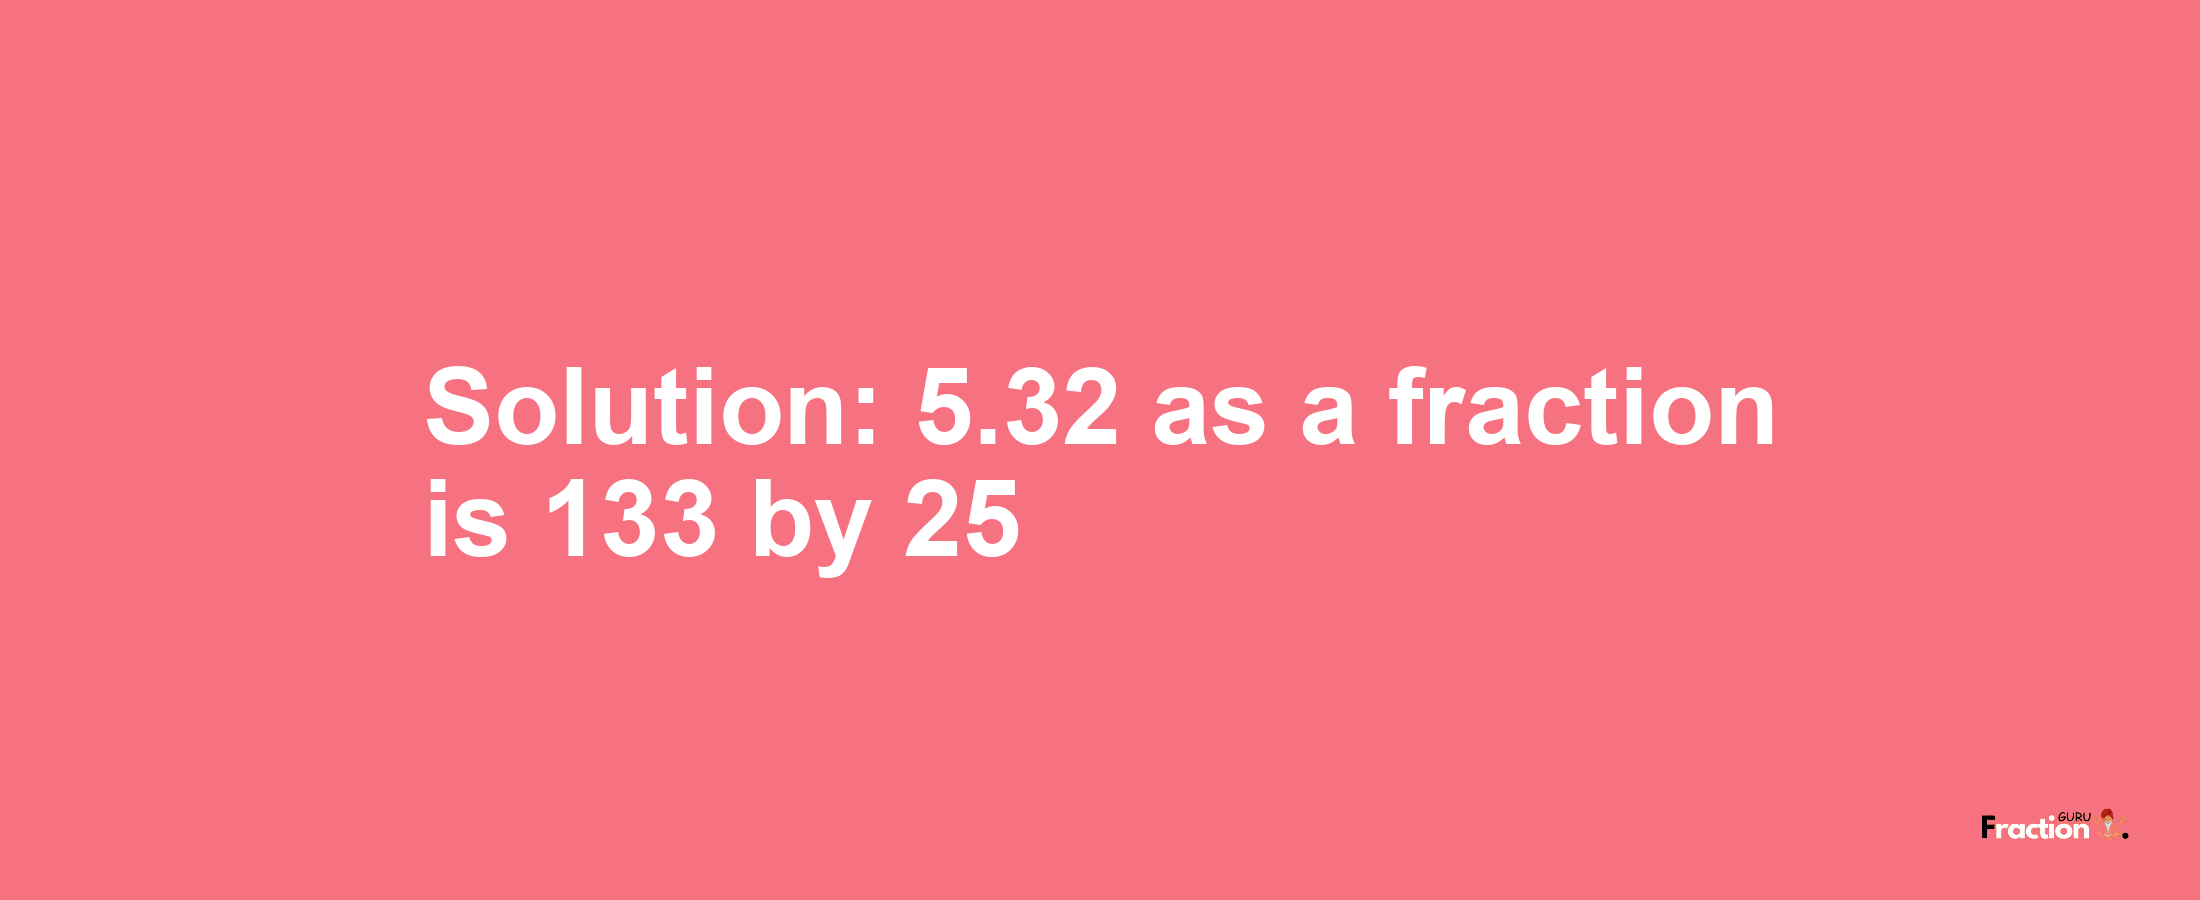 Solution:5.32 as a fraction is 133/25